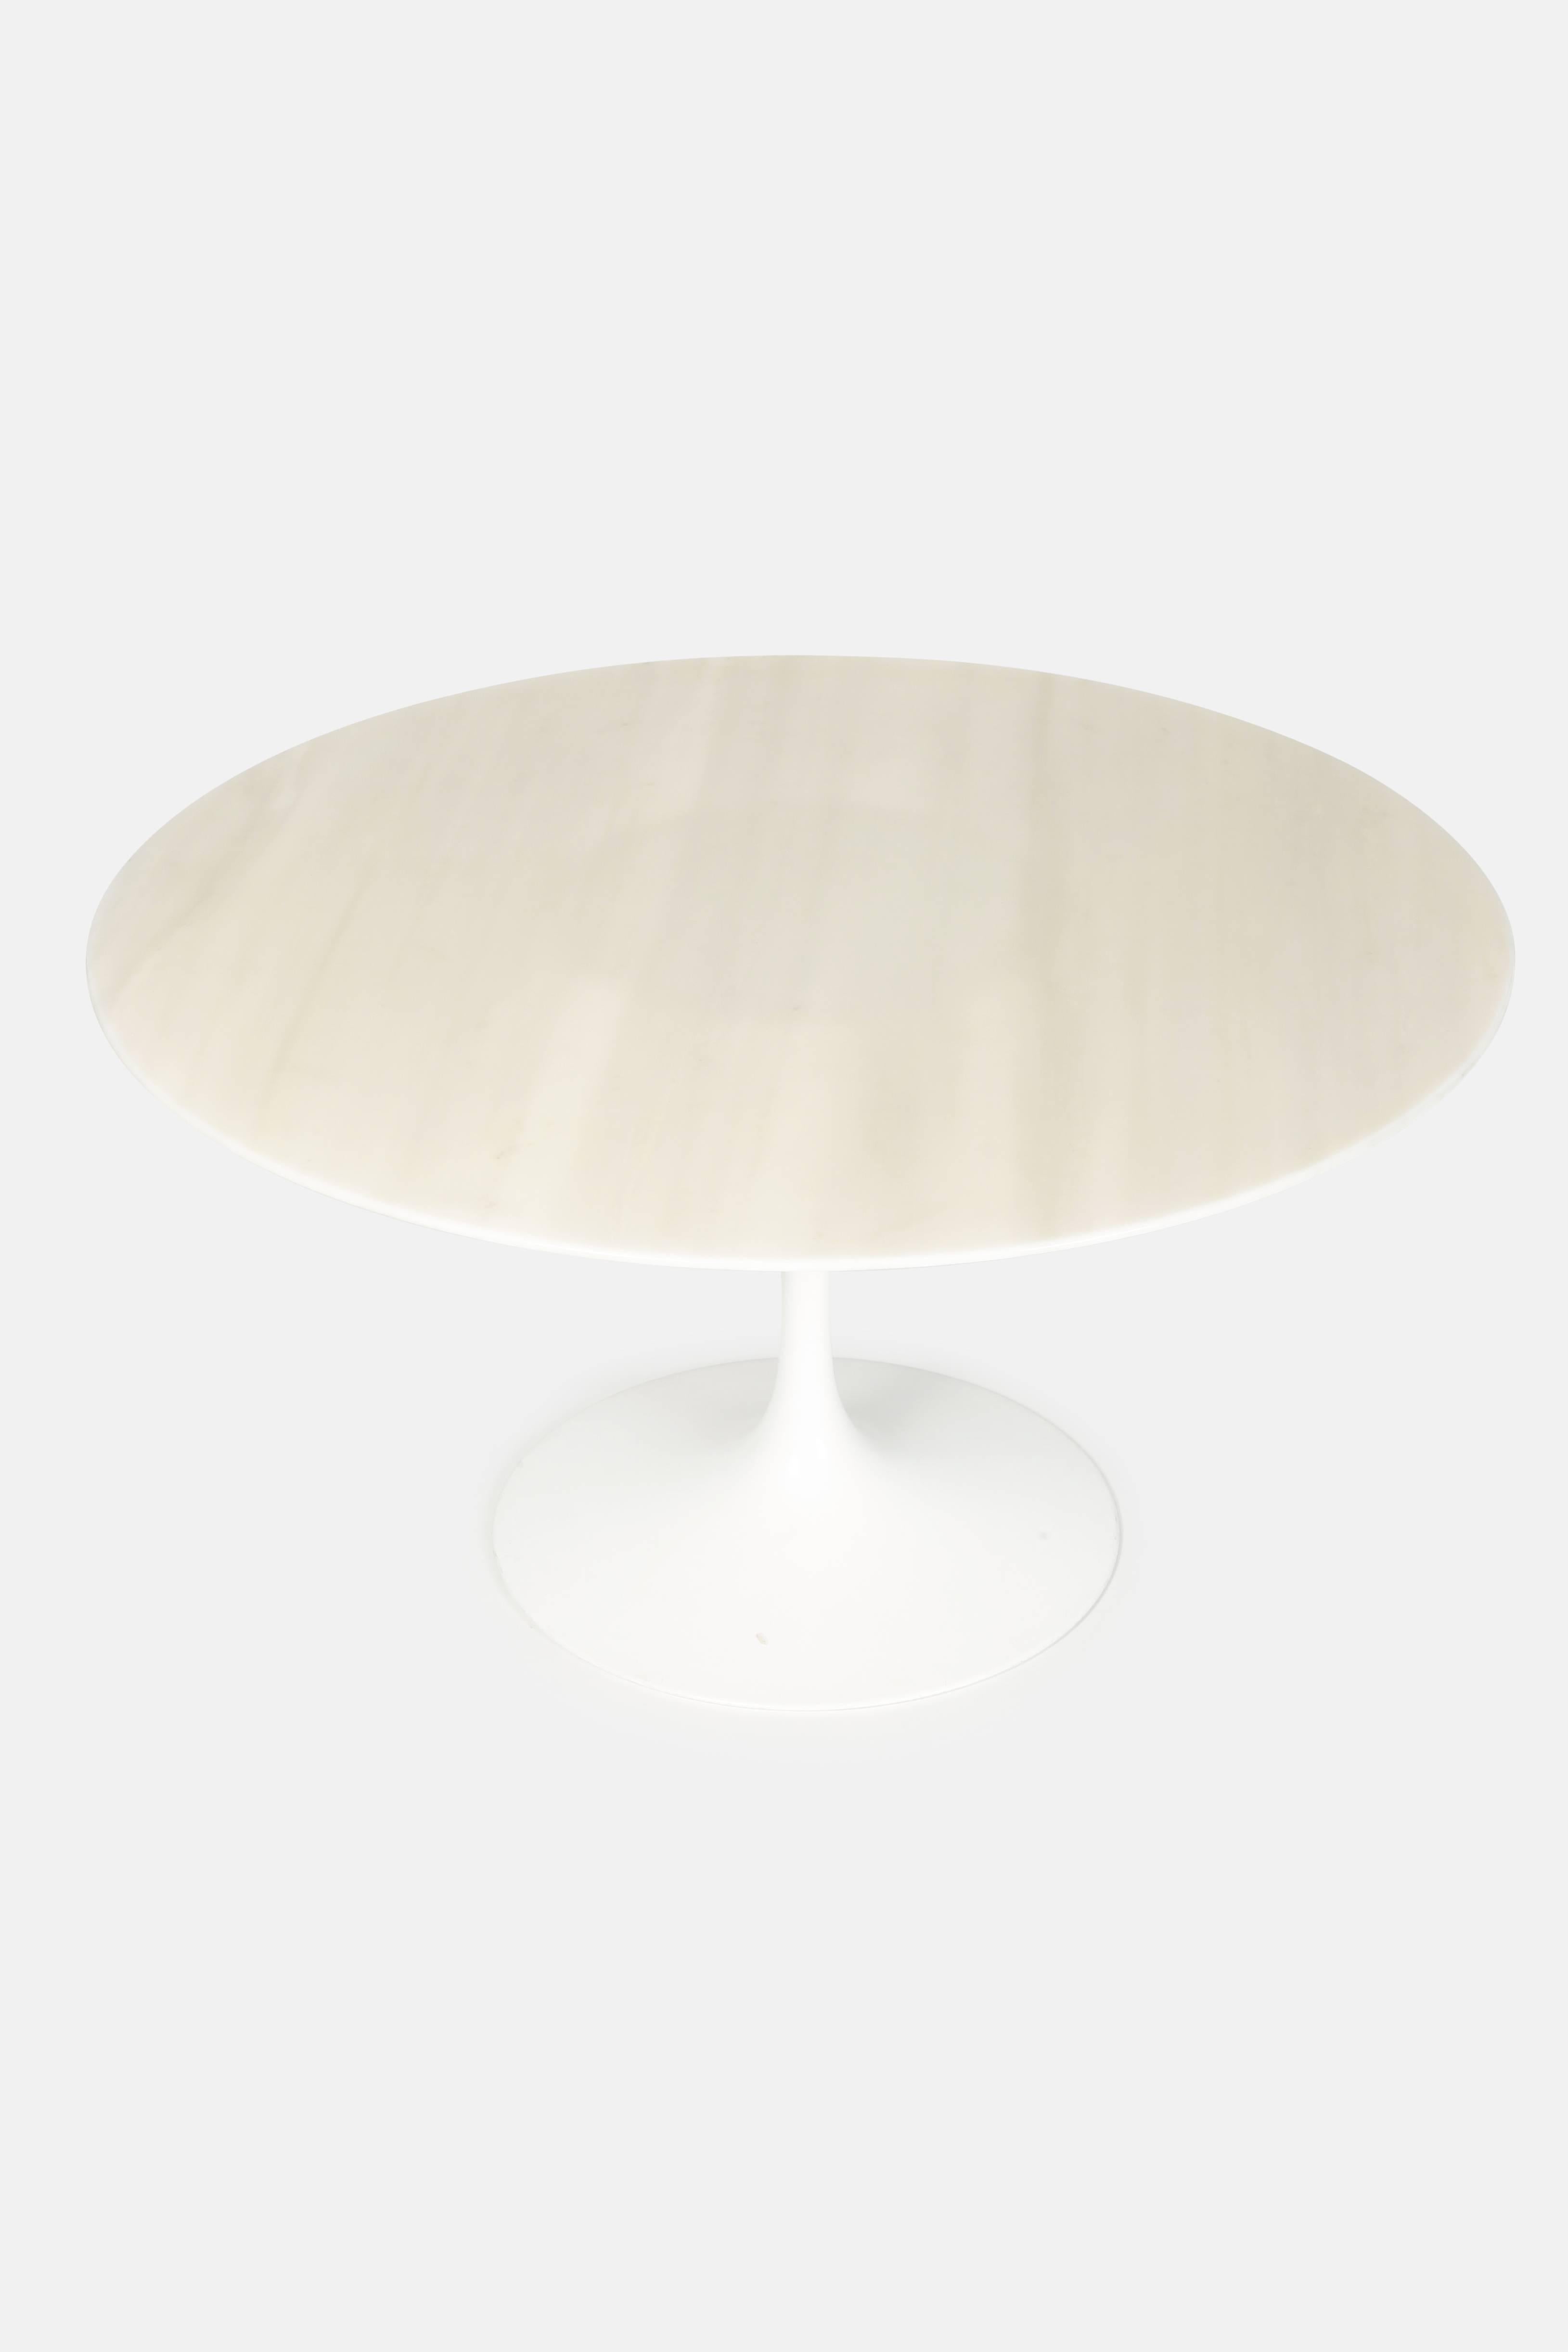 Eero Saarinen “Tulip” dining table manufactured by Knoll International in the 1970s, USA. Beautiful broad circular top of Carrara marble with a very elegant and soft grain supported by a white lacquered cast aluminium tulip base.